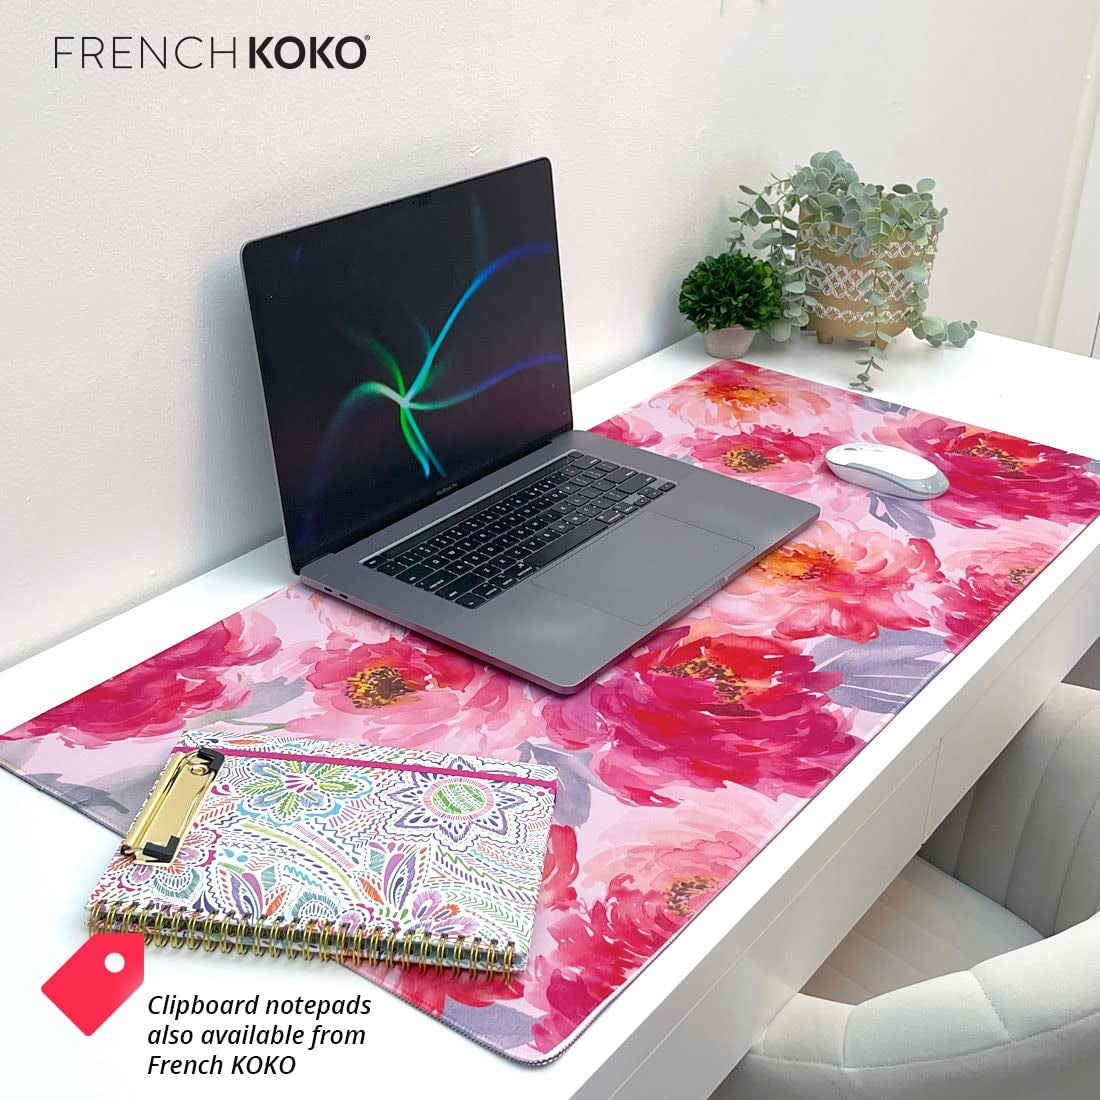 French KOKO Large Mouse Pad Big Desk Mat Extended Desk Pad Keyboard Gaming Mousepad Cute Office Decor Women Girls Computer Accessories College Essentials Work Home Office Supplies XL Pink Flowers